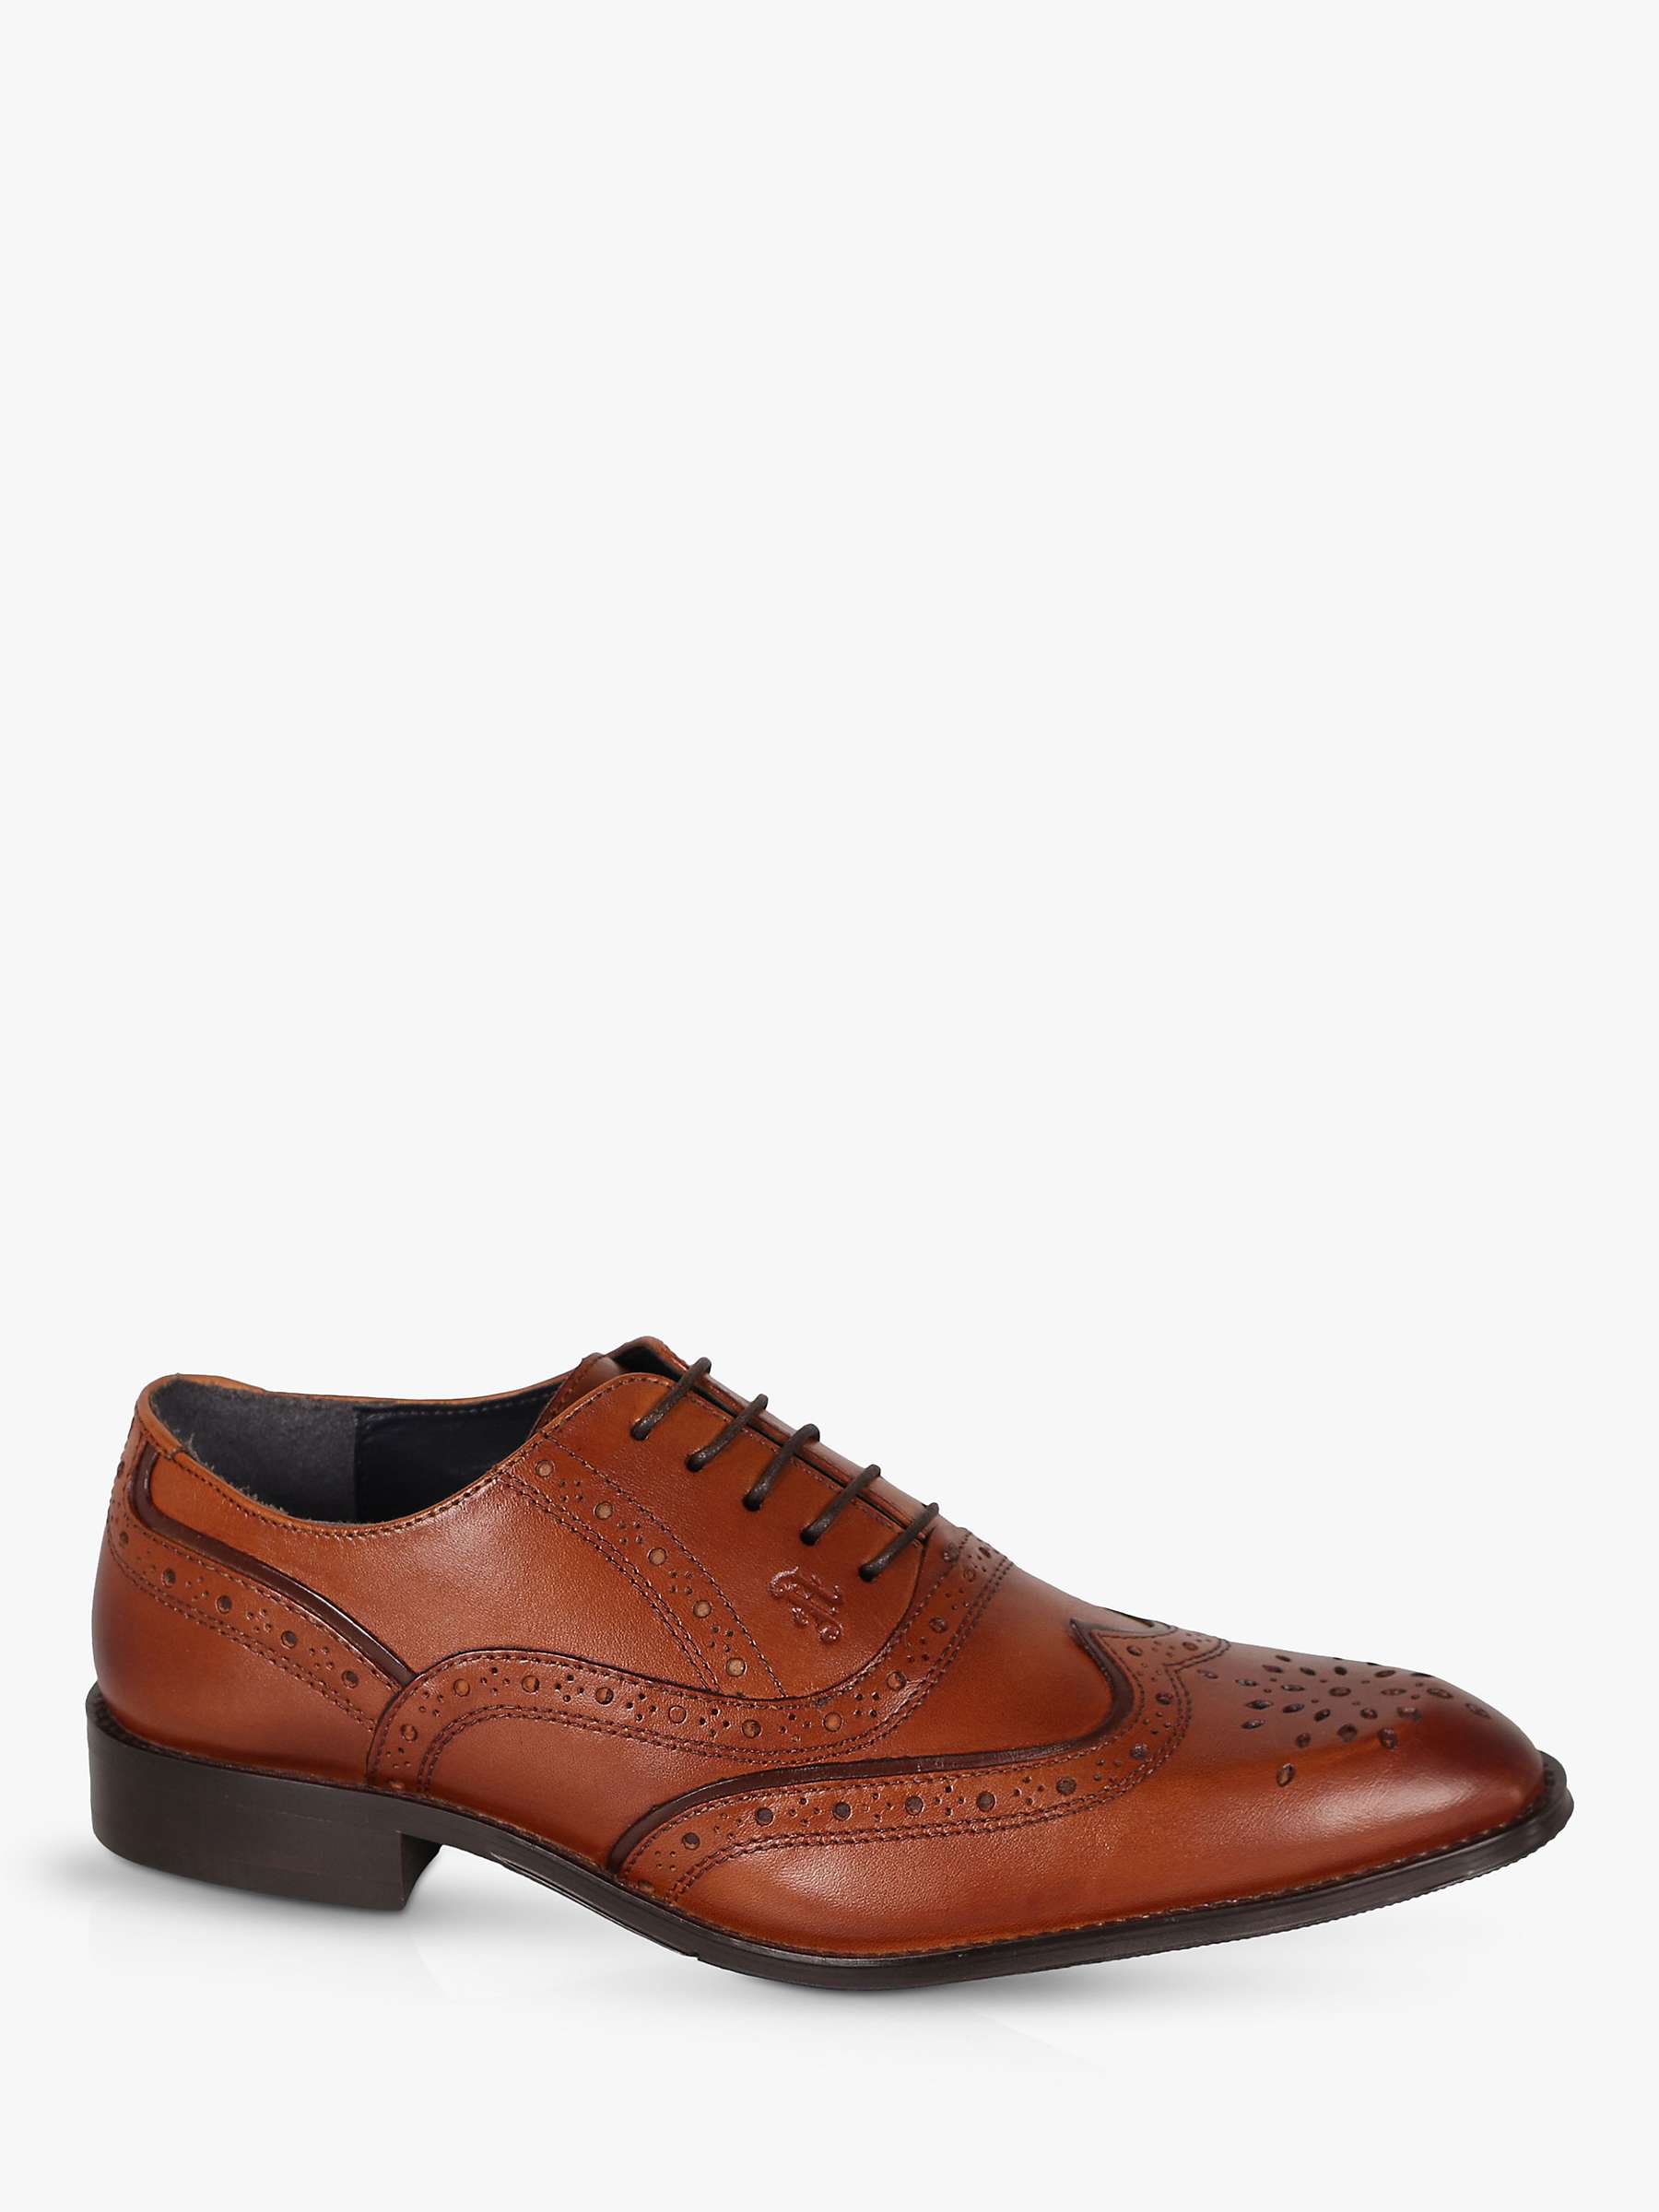 Buy Silver Street London Amen Collection Westport Leather Brogues, Tan Online at johnlewis.com